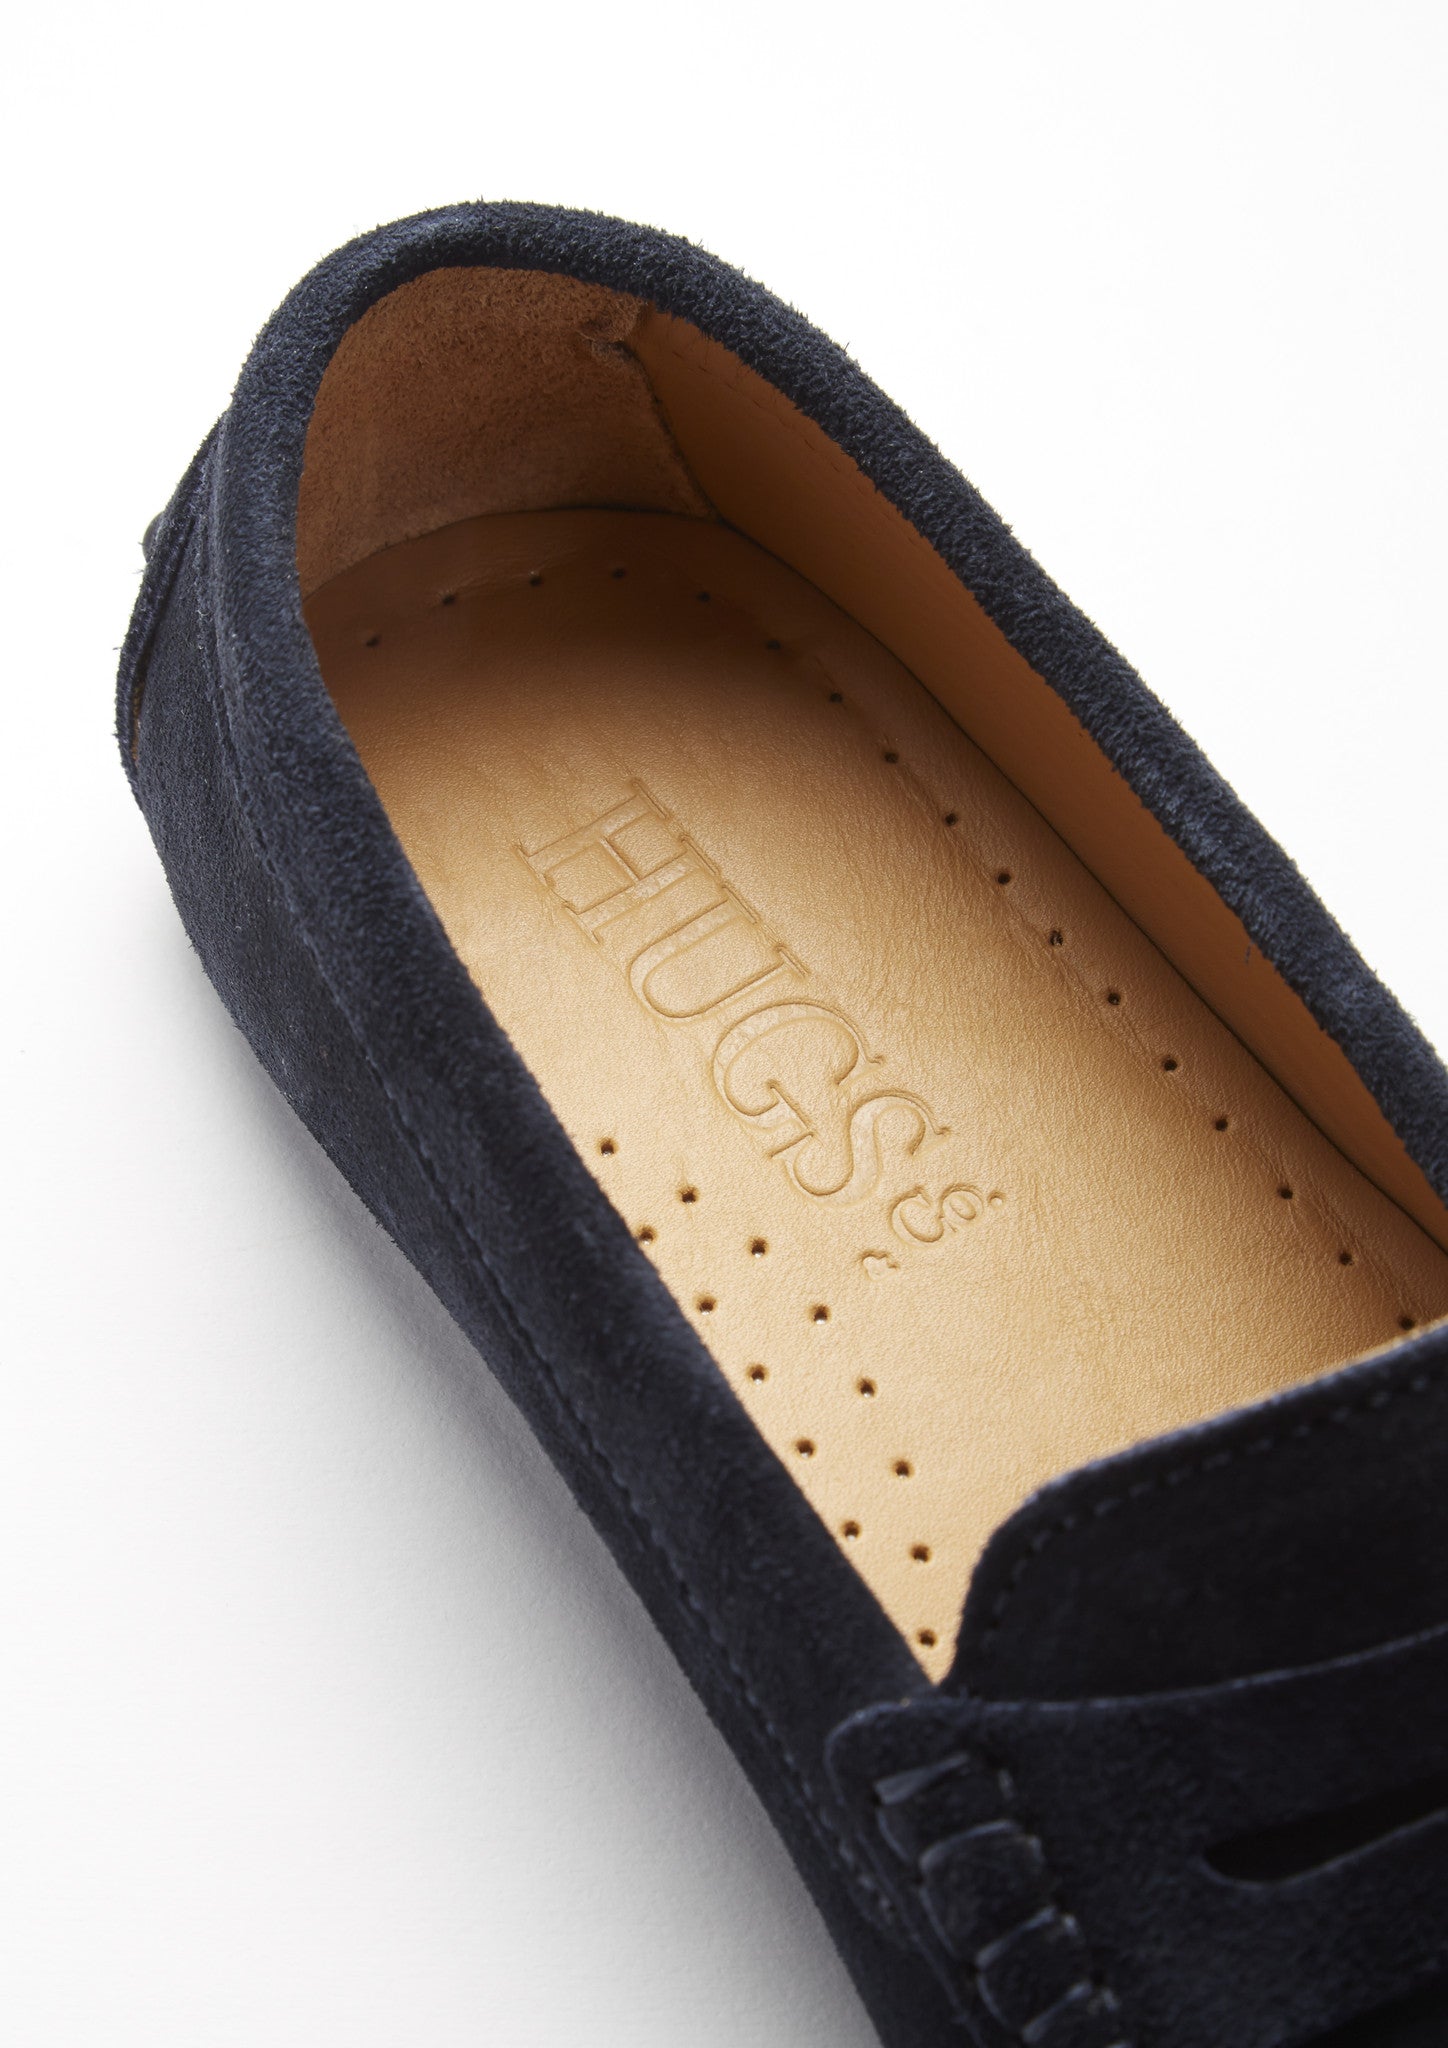 Women's Penny Driving Loafers, navy blue suede